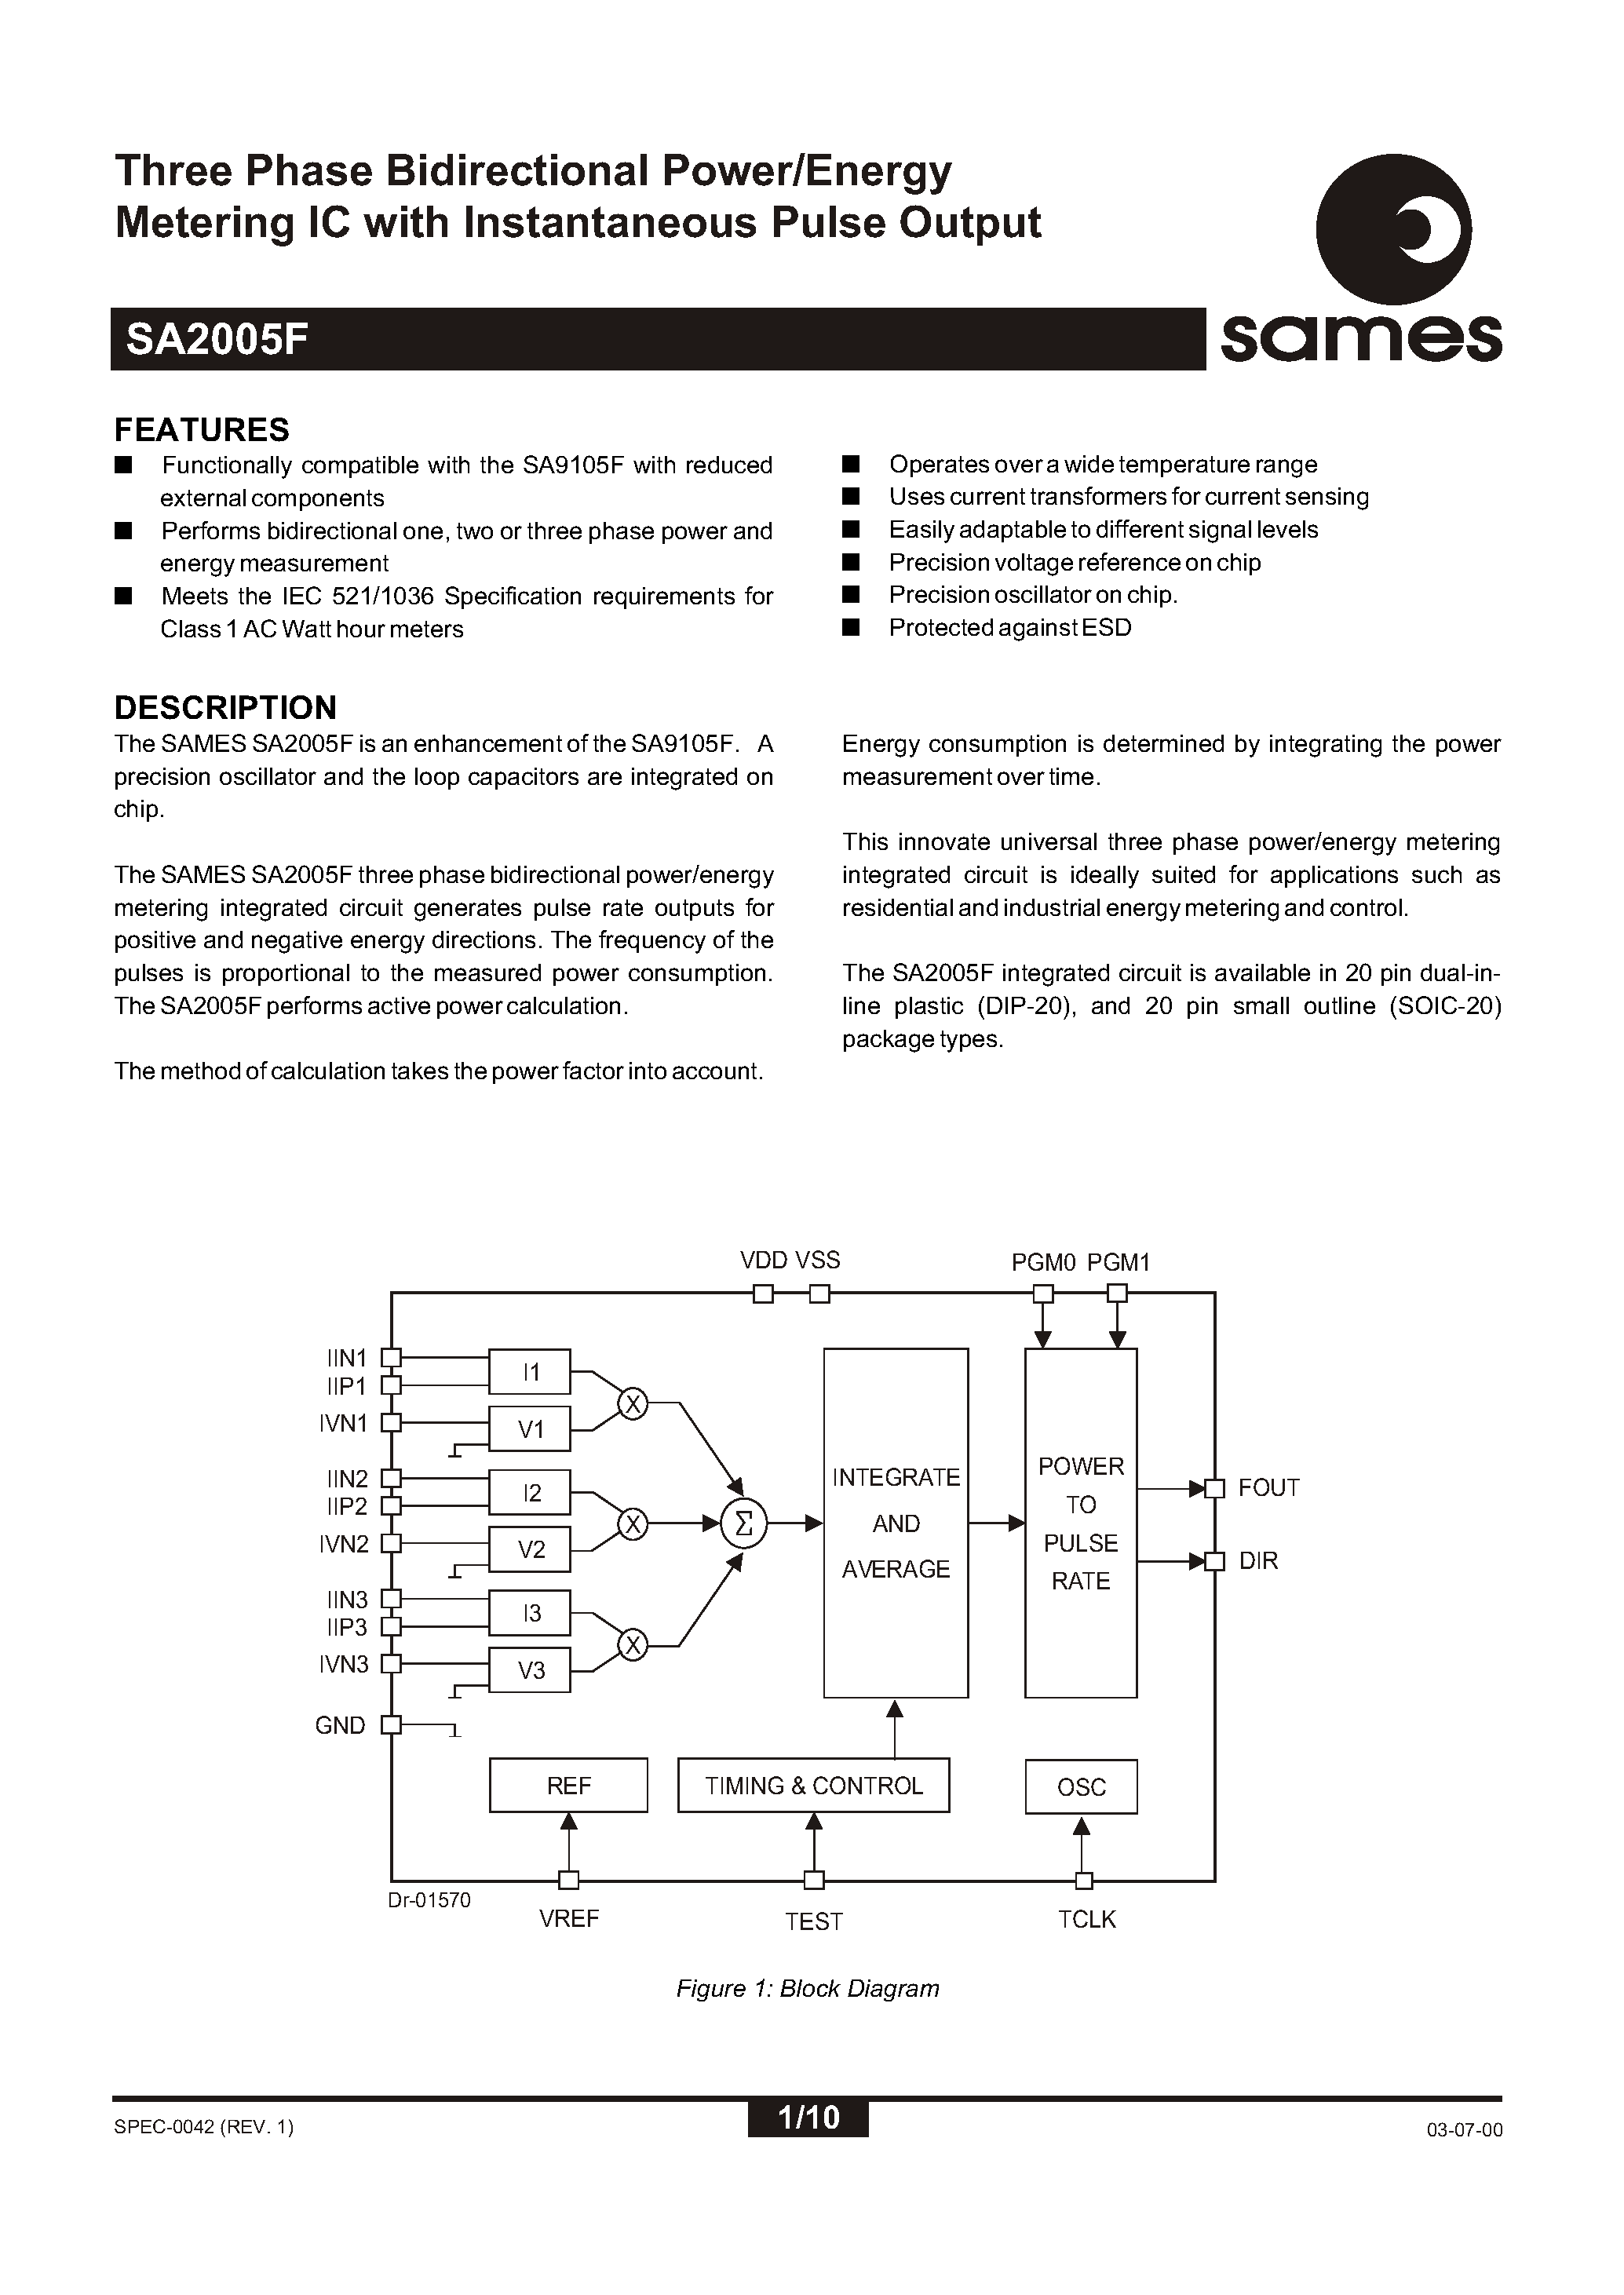 Datasheet SA2005F - Three Phase Bidirectional Power/Energy Metering IC with Instantaneous Pulse Output page 1